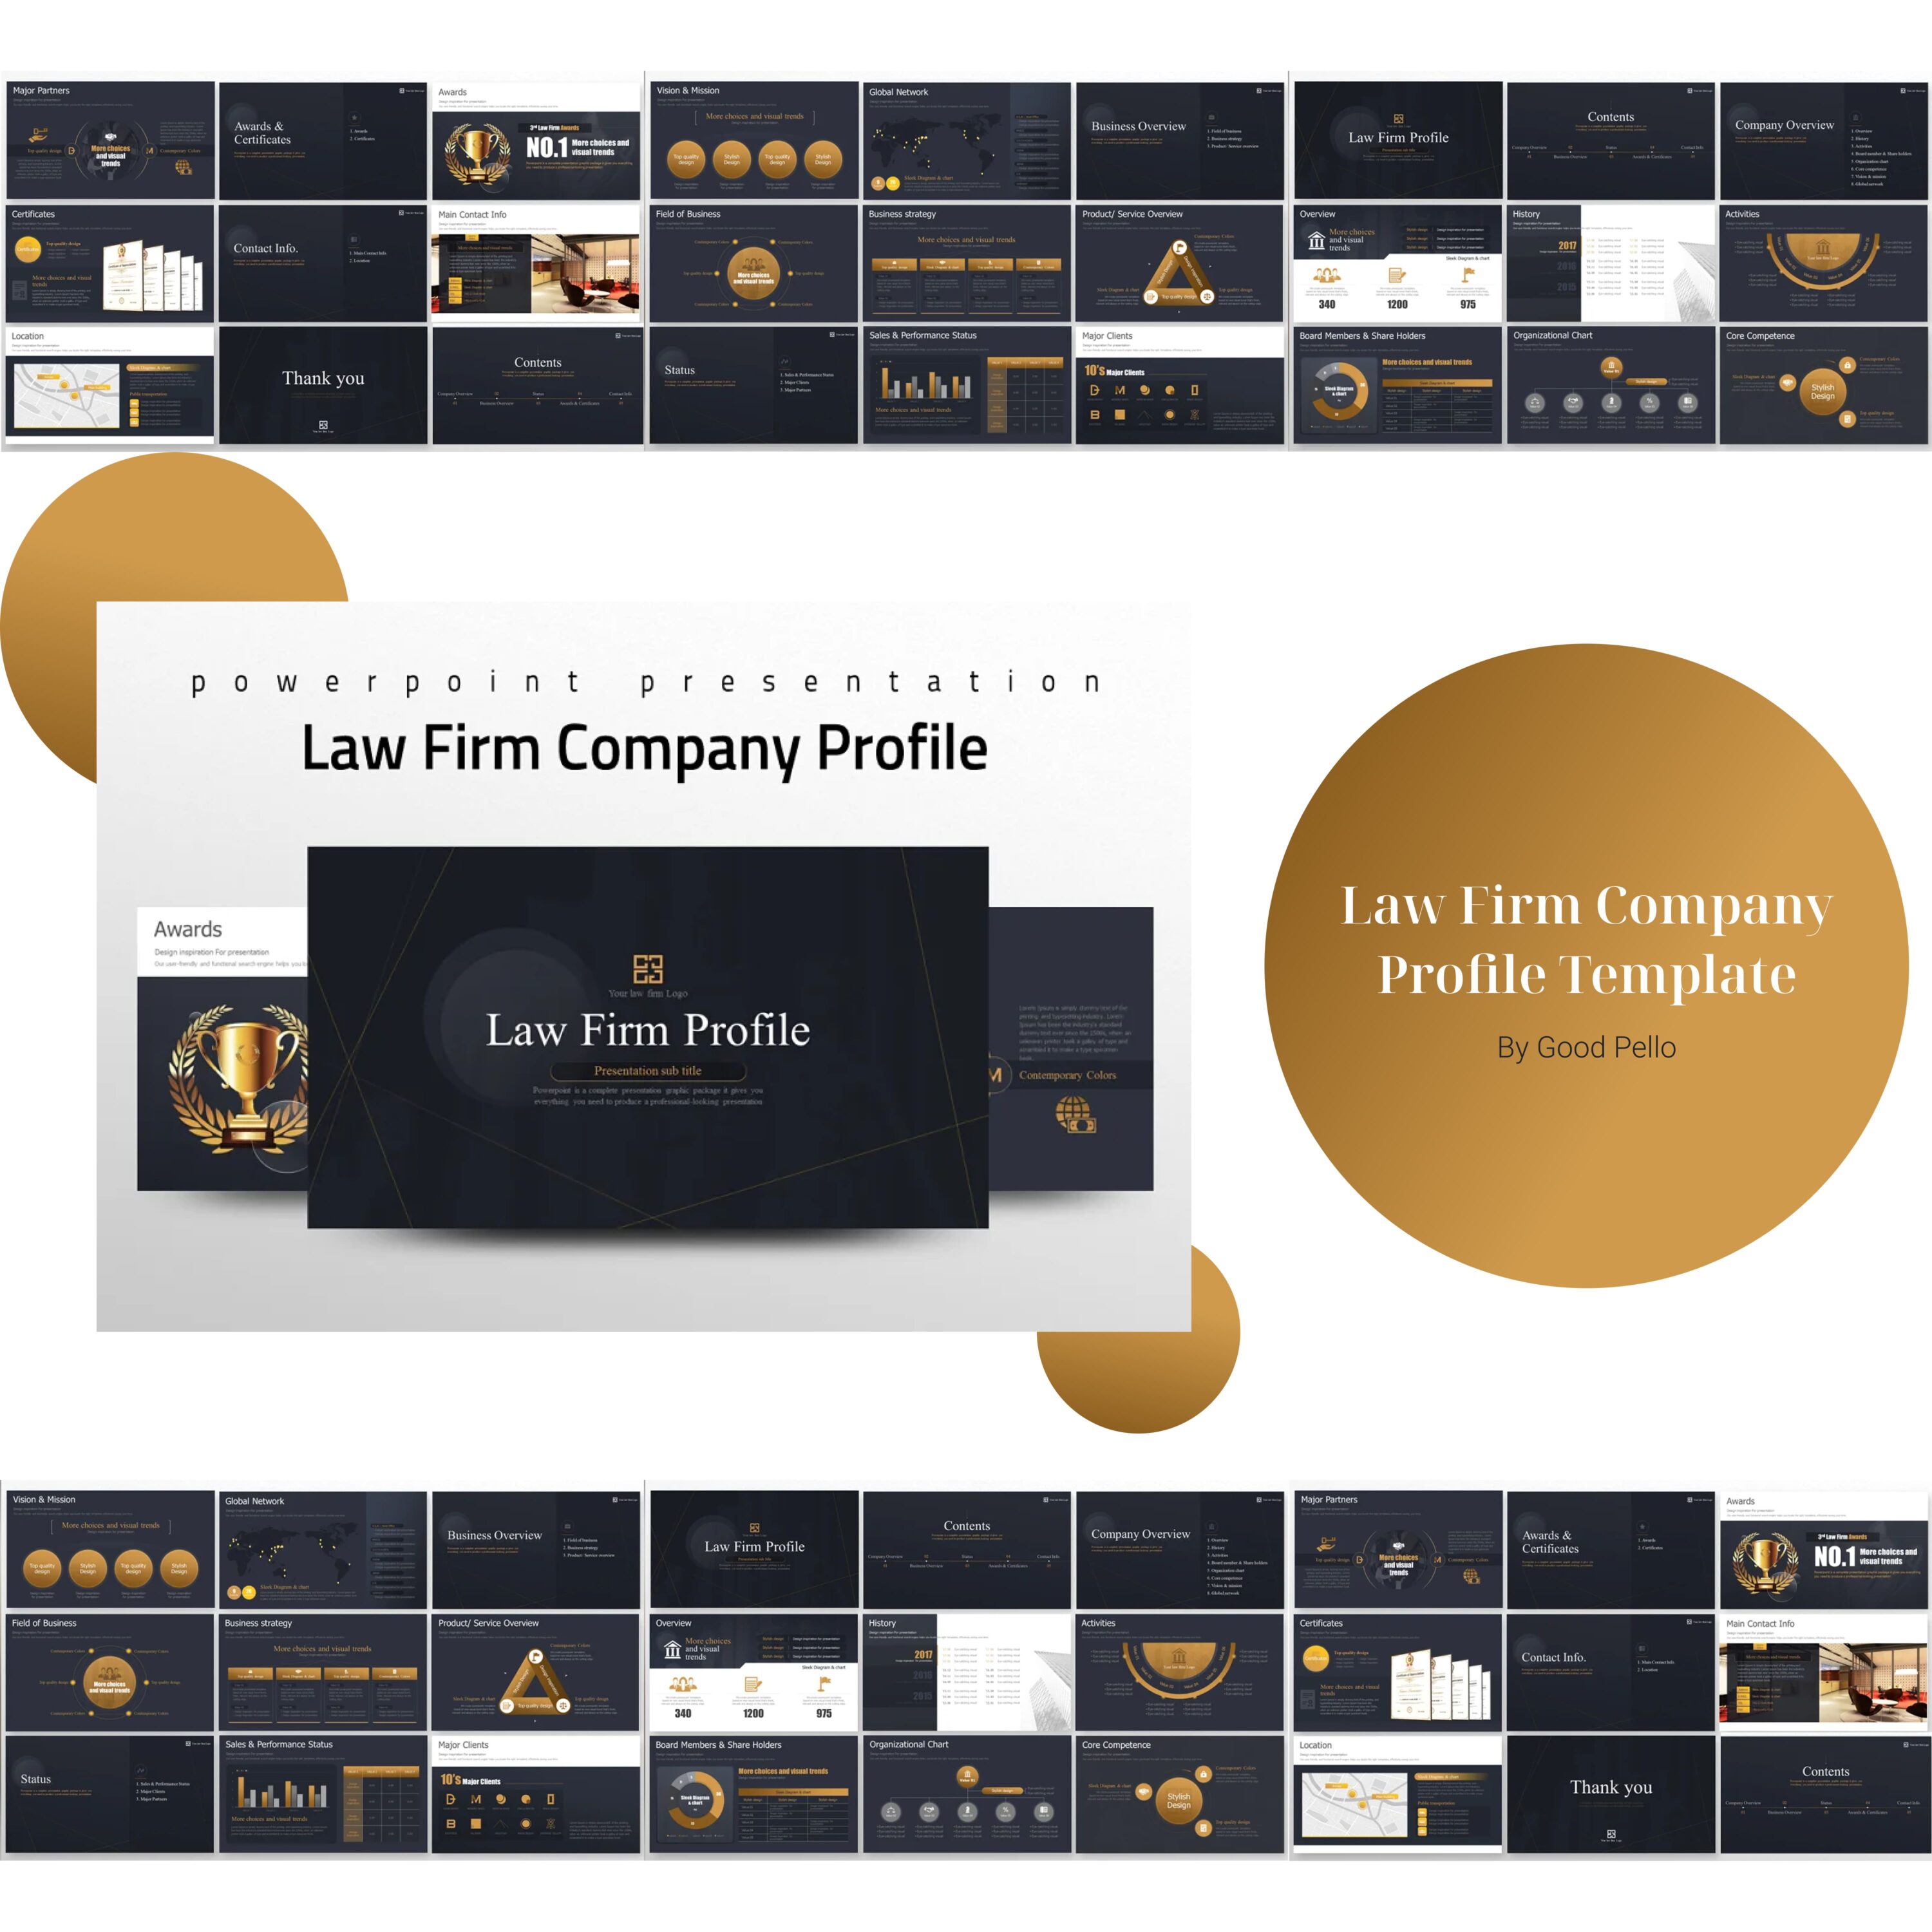 2law firm company profile template.